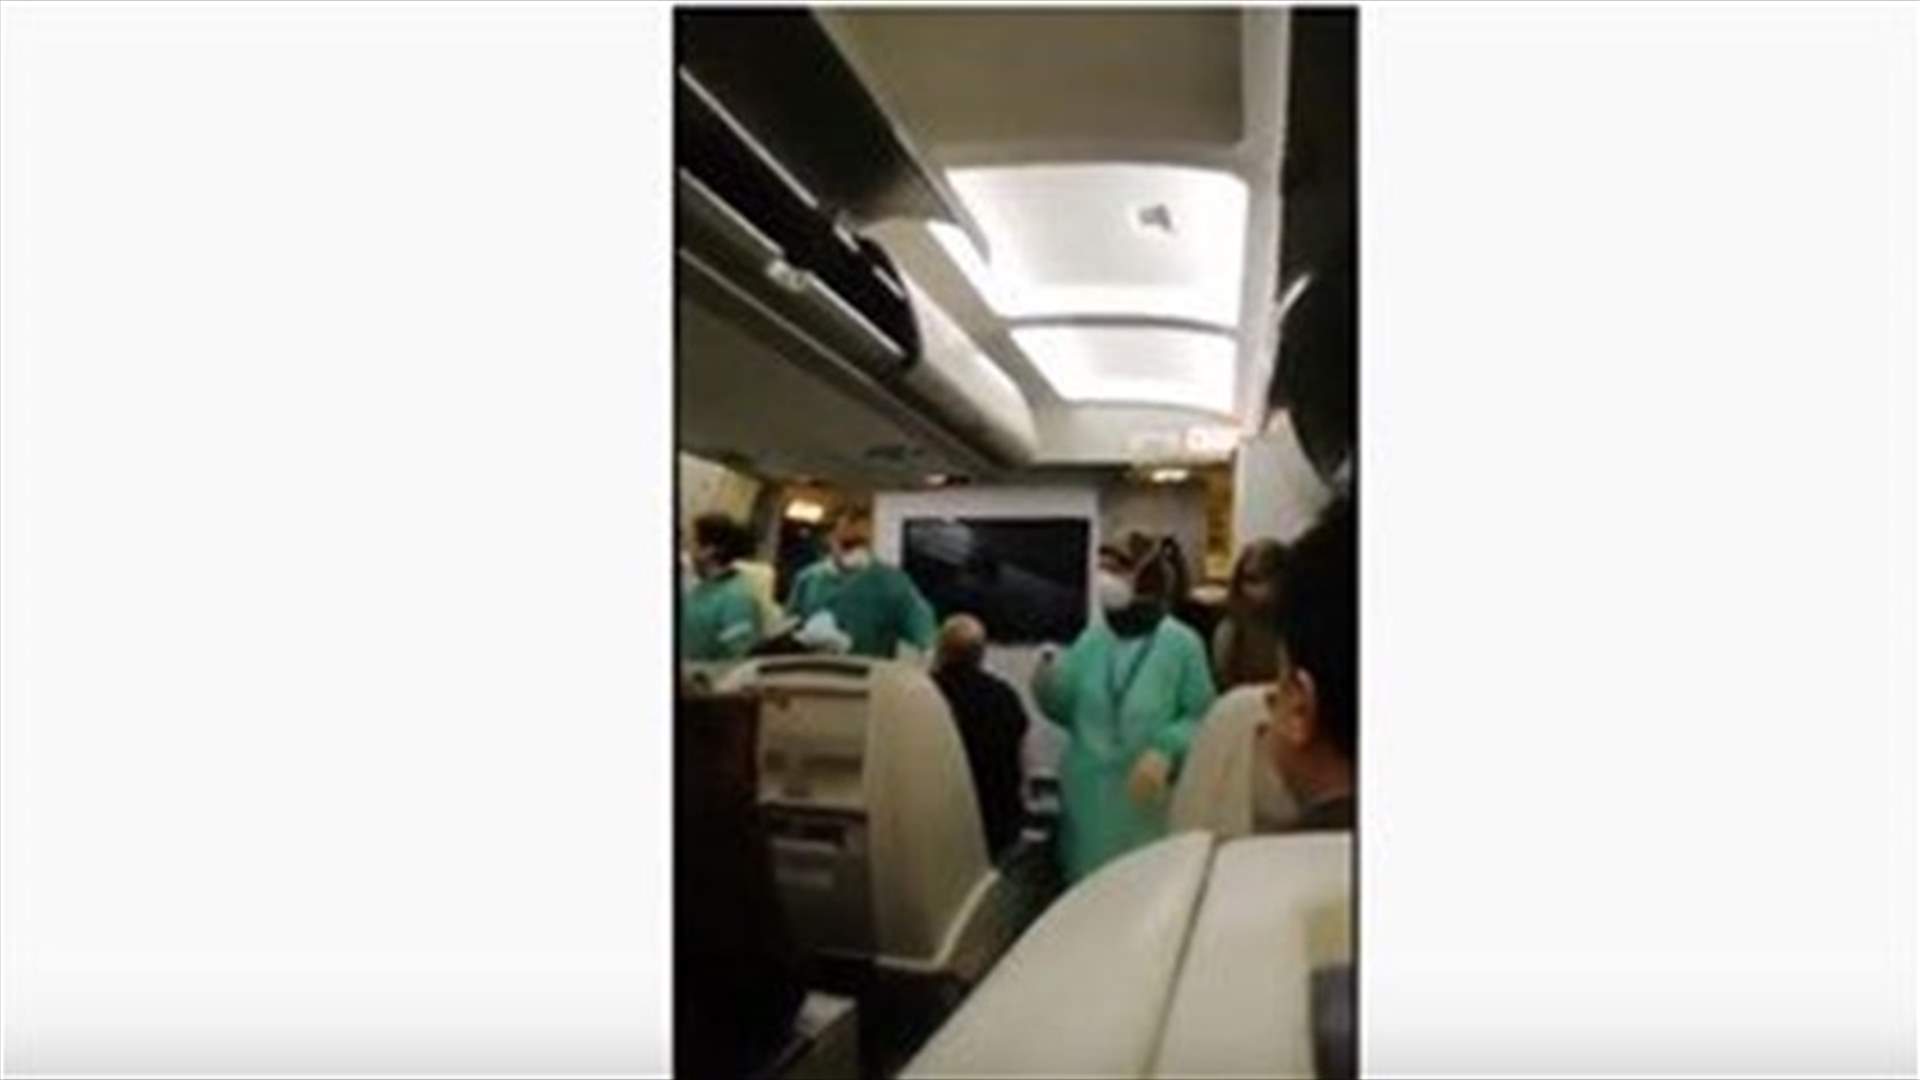 Video of moment when medical team inspected Iranian plane at Beirut airport-[VIDEO]